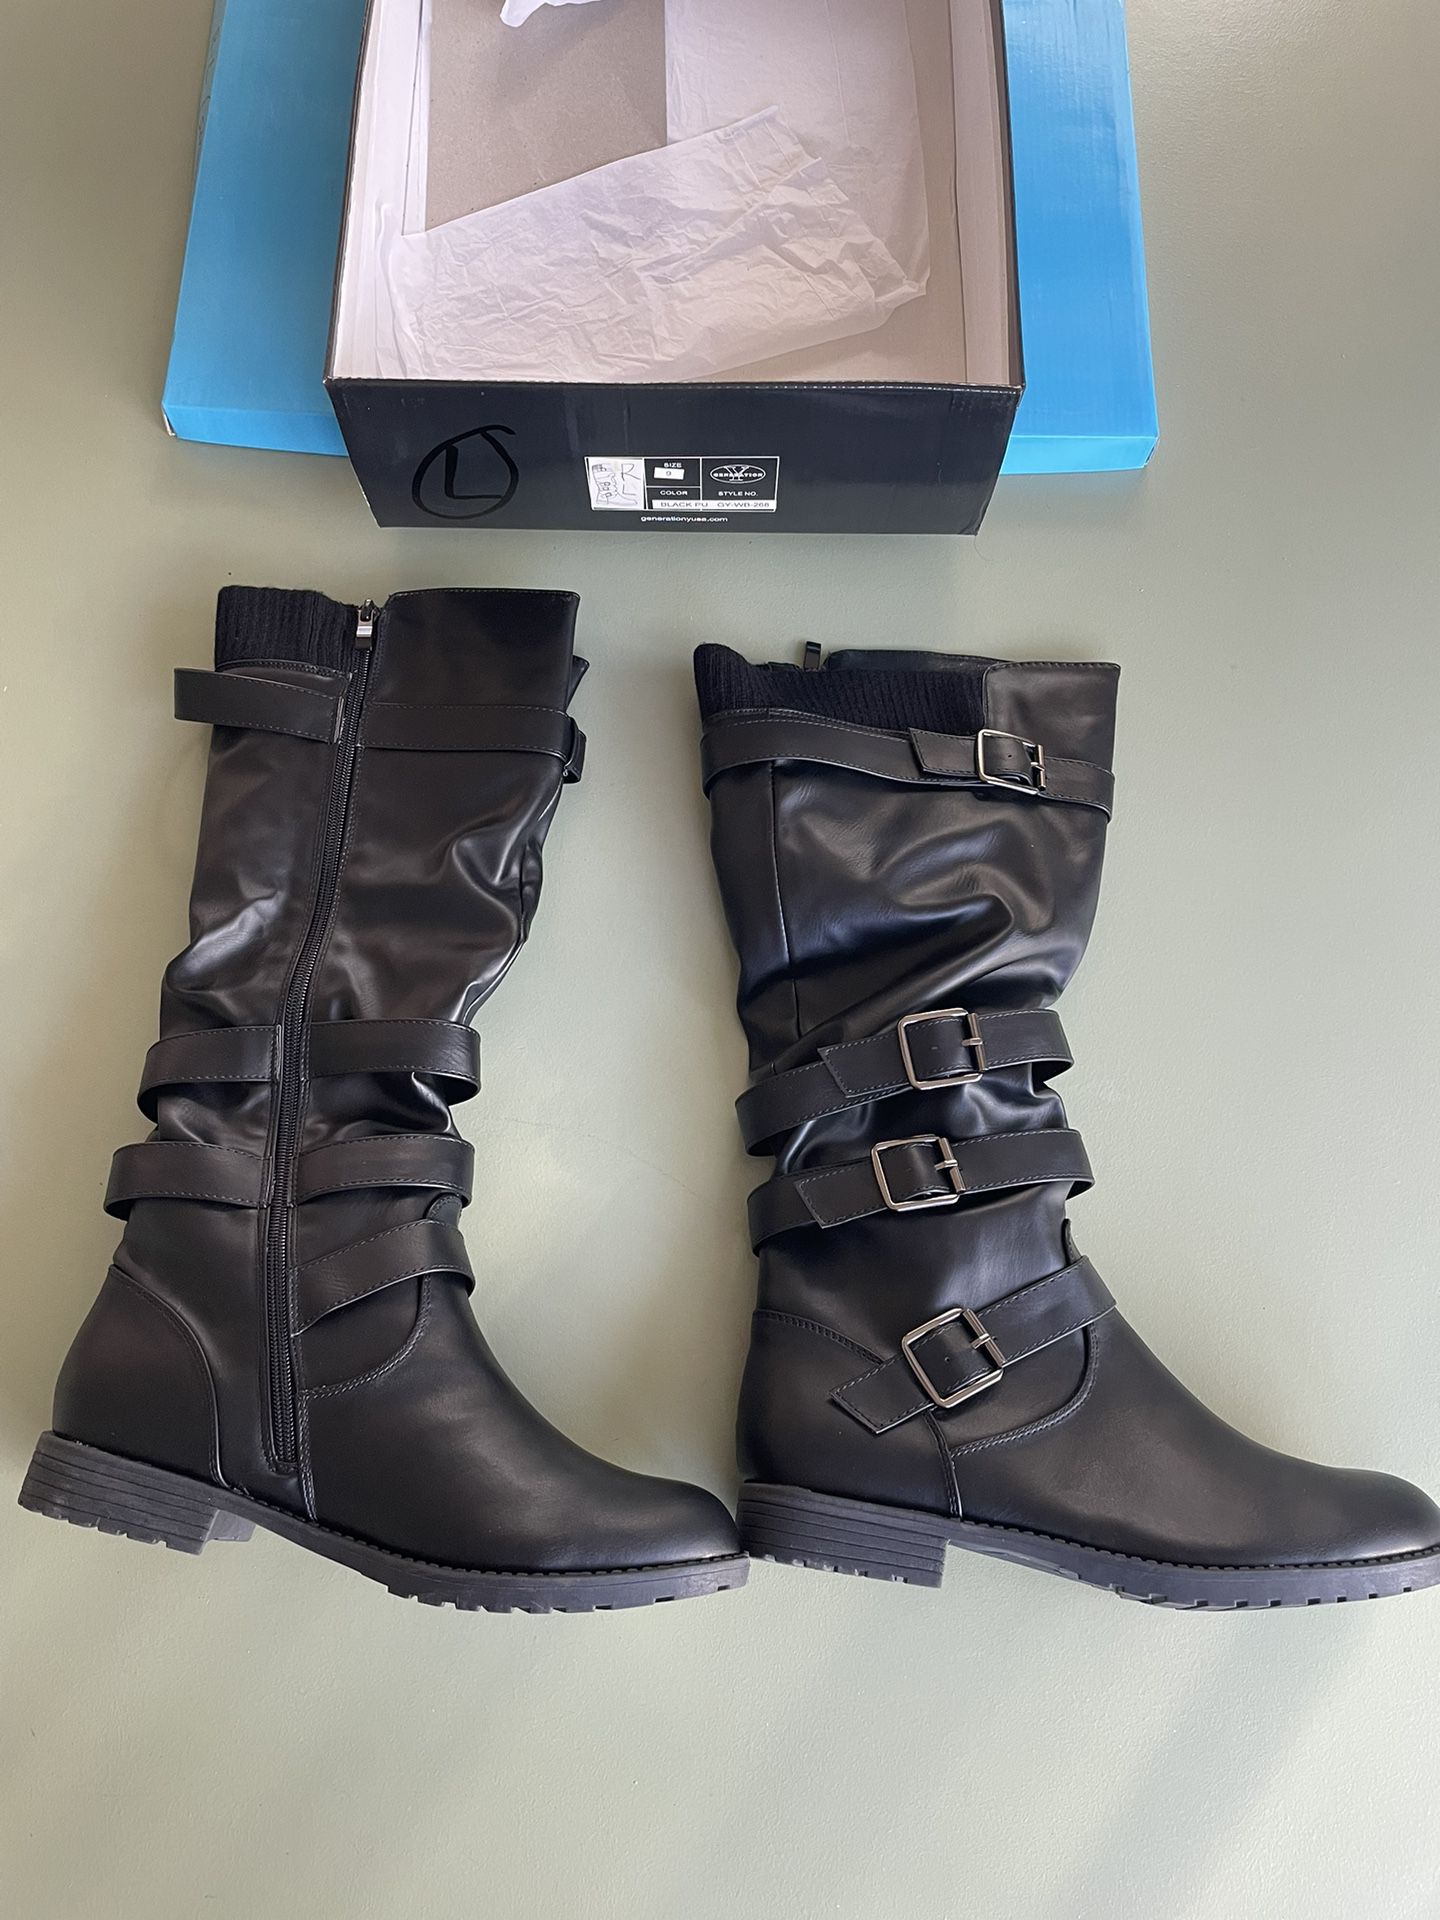 BLACK BOOTS - NEW IN BOX - SIZE 9